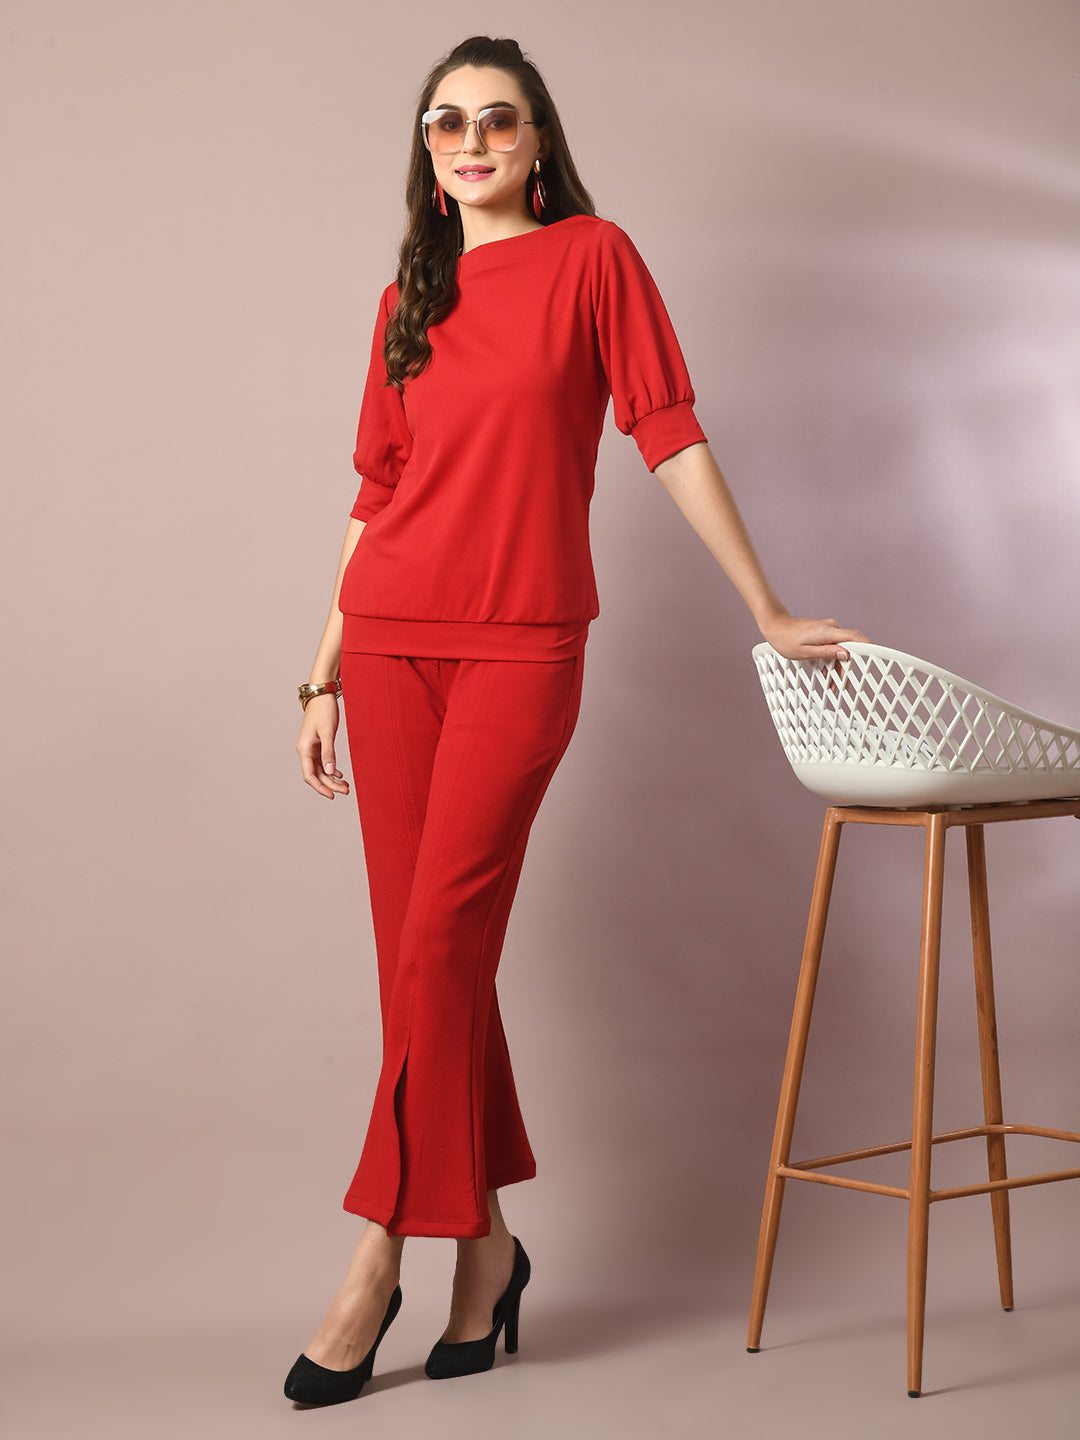 Women's  Red Solid Boat Neck Party Top  - Myshka